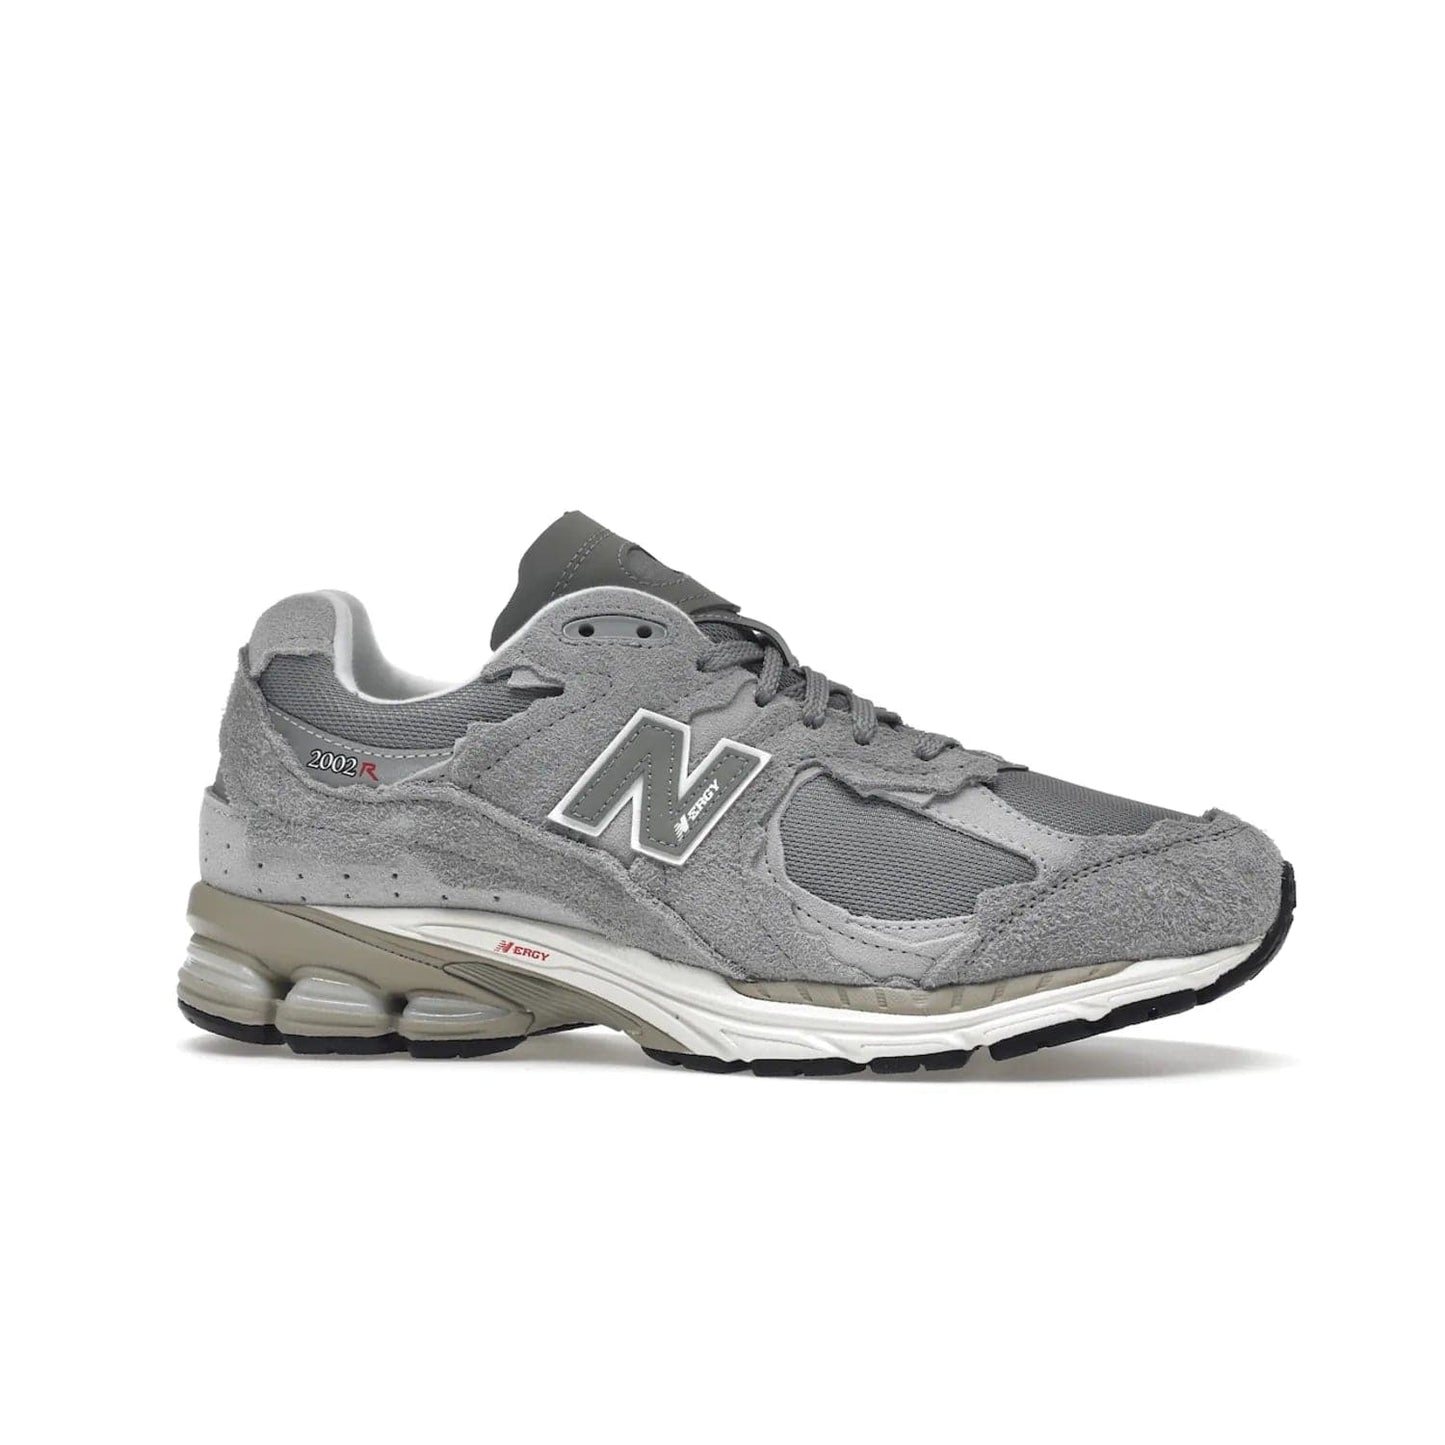 New Balance 2002R Protection Pack Grey - Image 2 - Only at www.BallersClubKickz.com - The New Balance 2002R Protection Pack Grey provides superior protection and all-day comfort. It features a blend of synthetic and mesh materials, foam midsole, rubber outsole, and a toe cap and heel counter. Show off the classic "N" logo and "2002R" lettering. Get a pair on February 14, 2023 for protection and style.